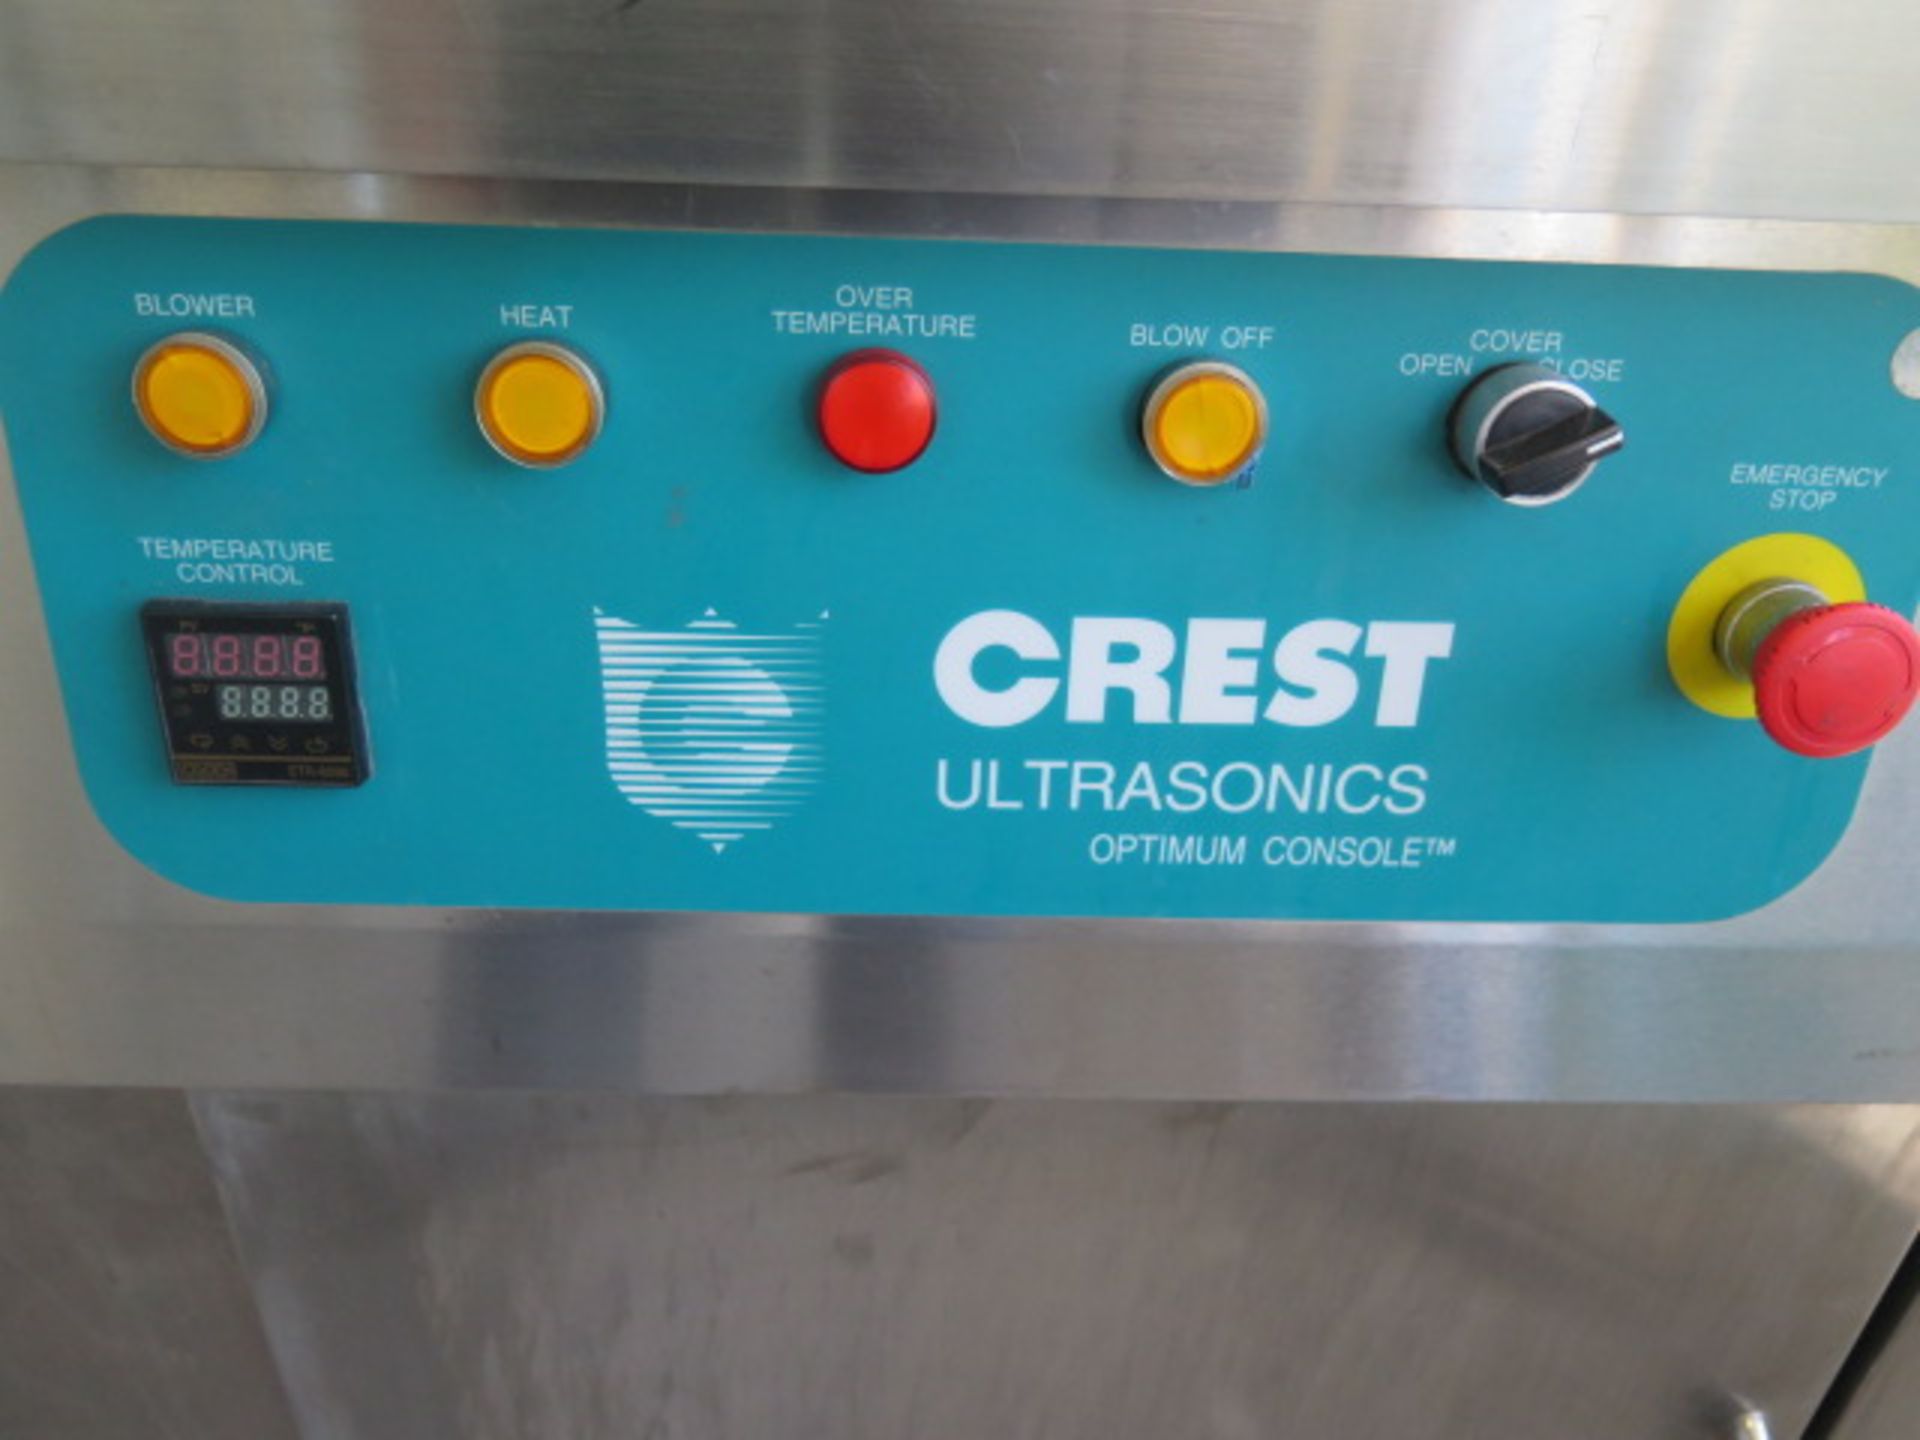 Crest Ultrasonic mdl. OC4-1218-HE 4-Station Ultrasonic Cleaning System s/n 0702-T-0484, SOLD AS IS - Image 5 of 10